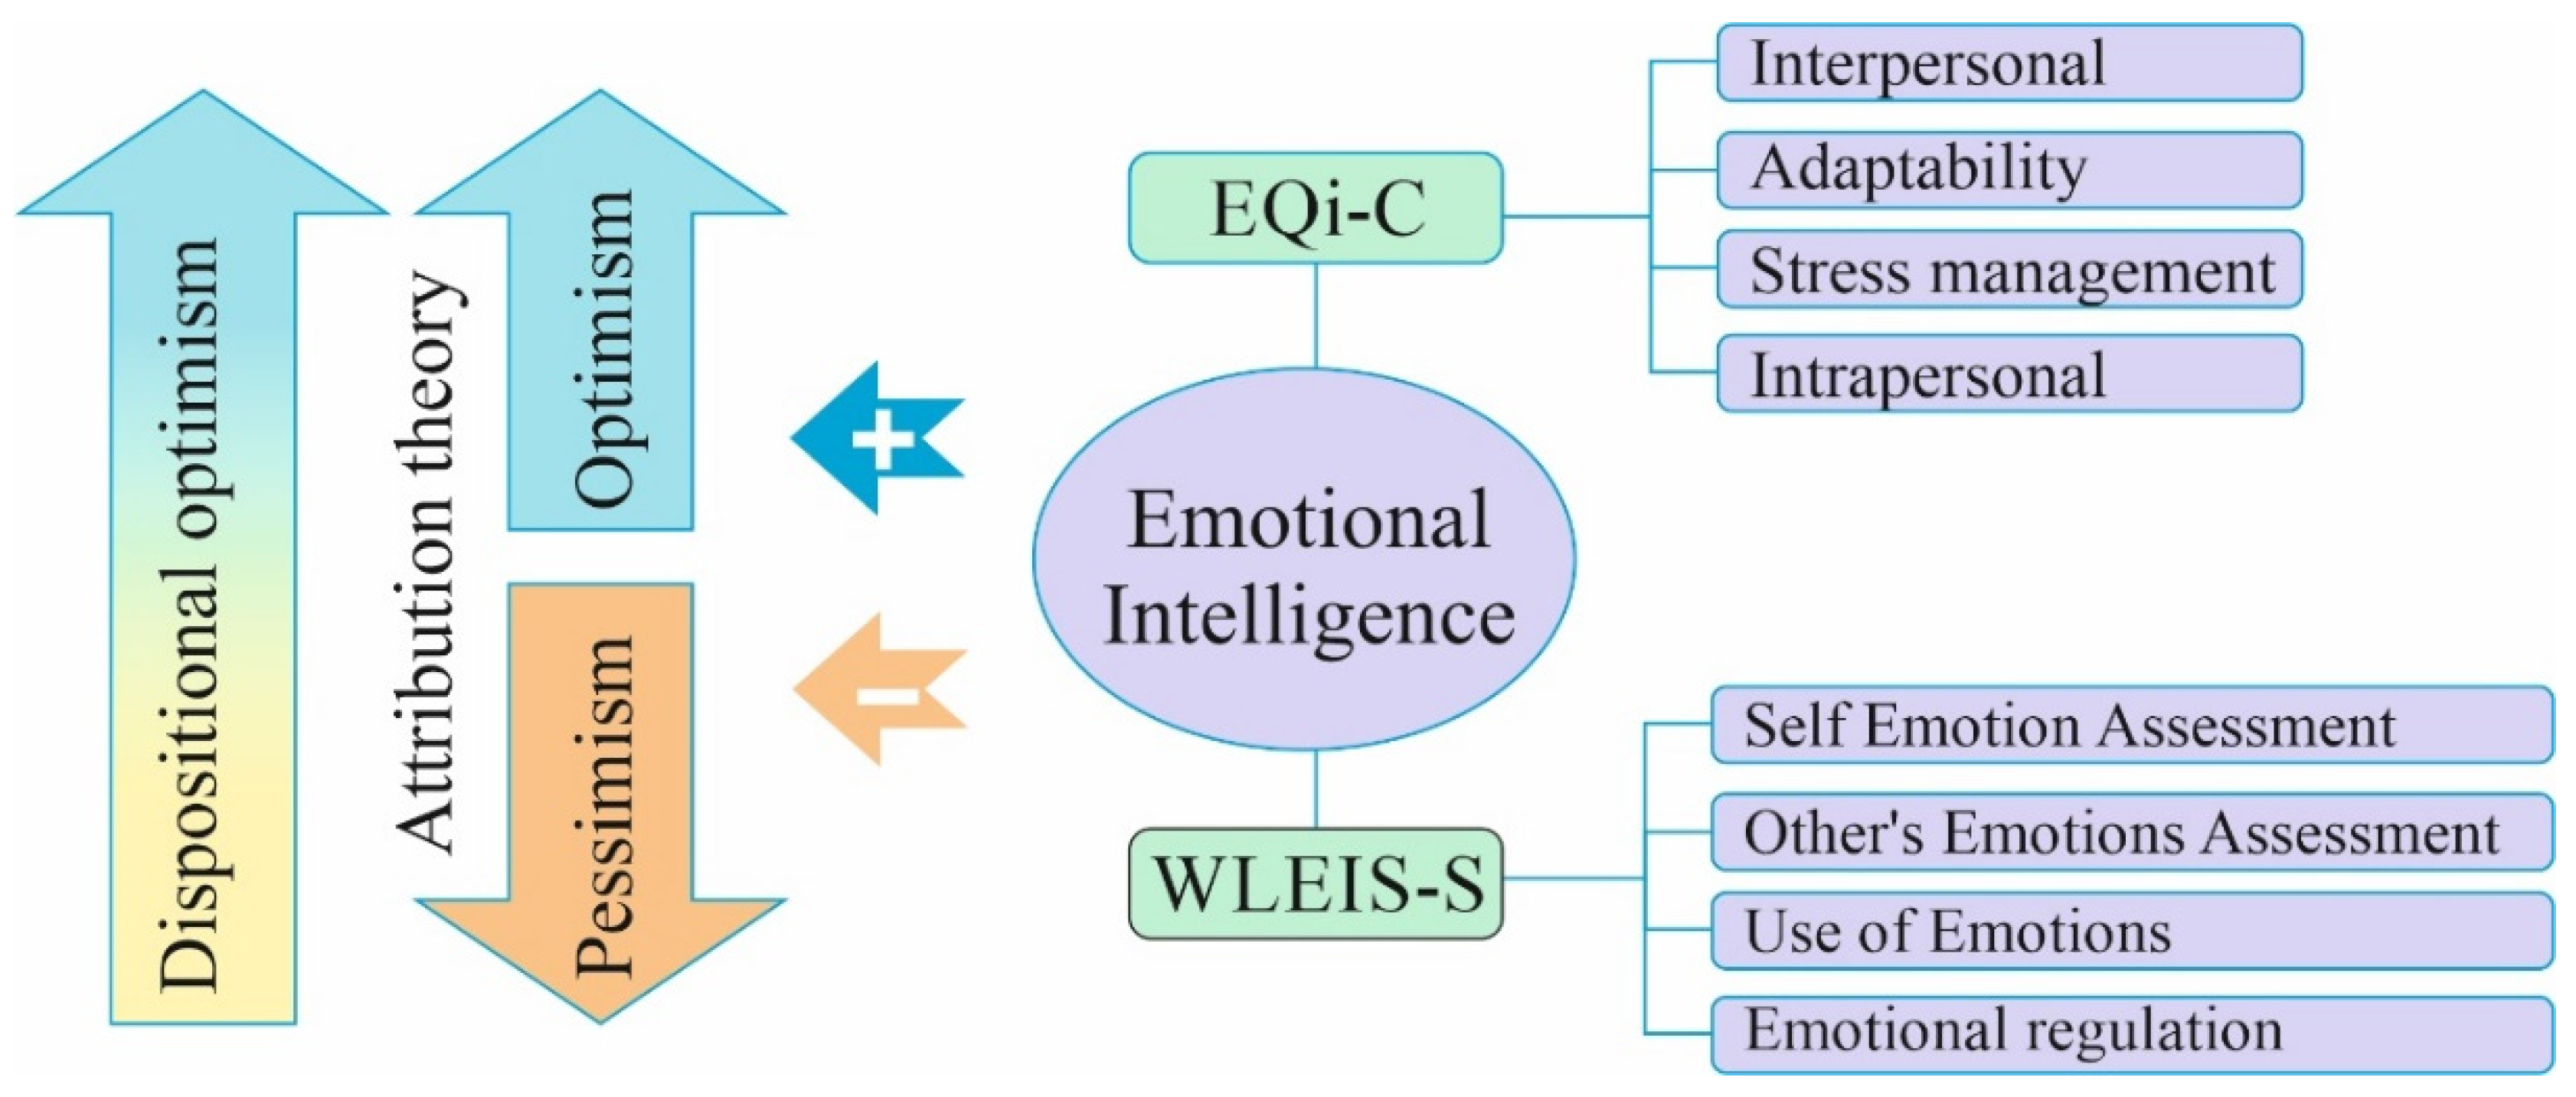 Social Sciences | Free Full-Text | Relationship between Emotional  Intelligence and Optimism According to Gender and Social Context (Urban vs.  Rural) | HTML